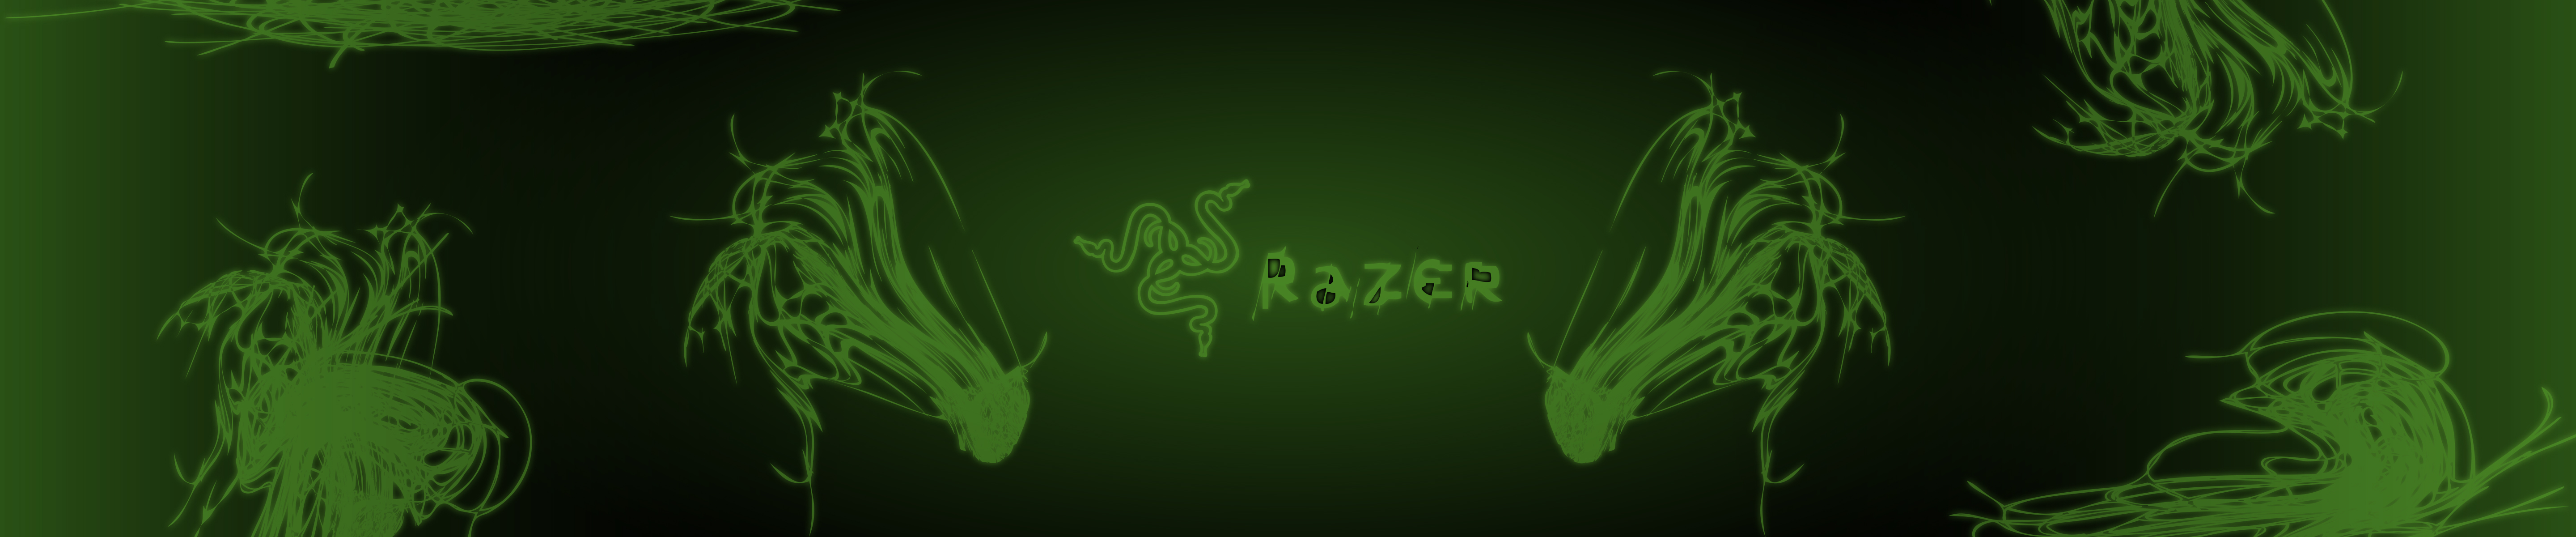 Razer Triple Screen Wallpaper PC Android iPhone and iPad Wallpapers 5760x1200